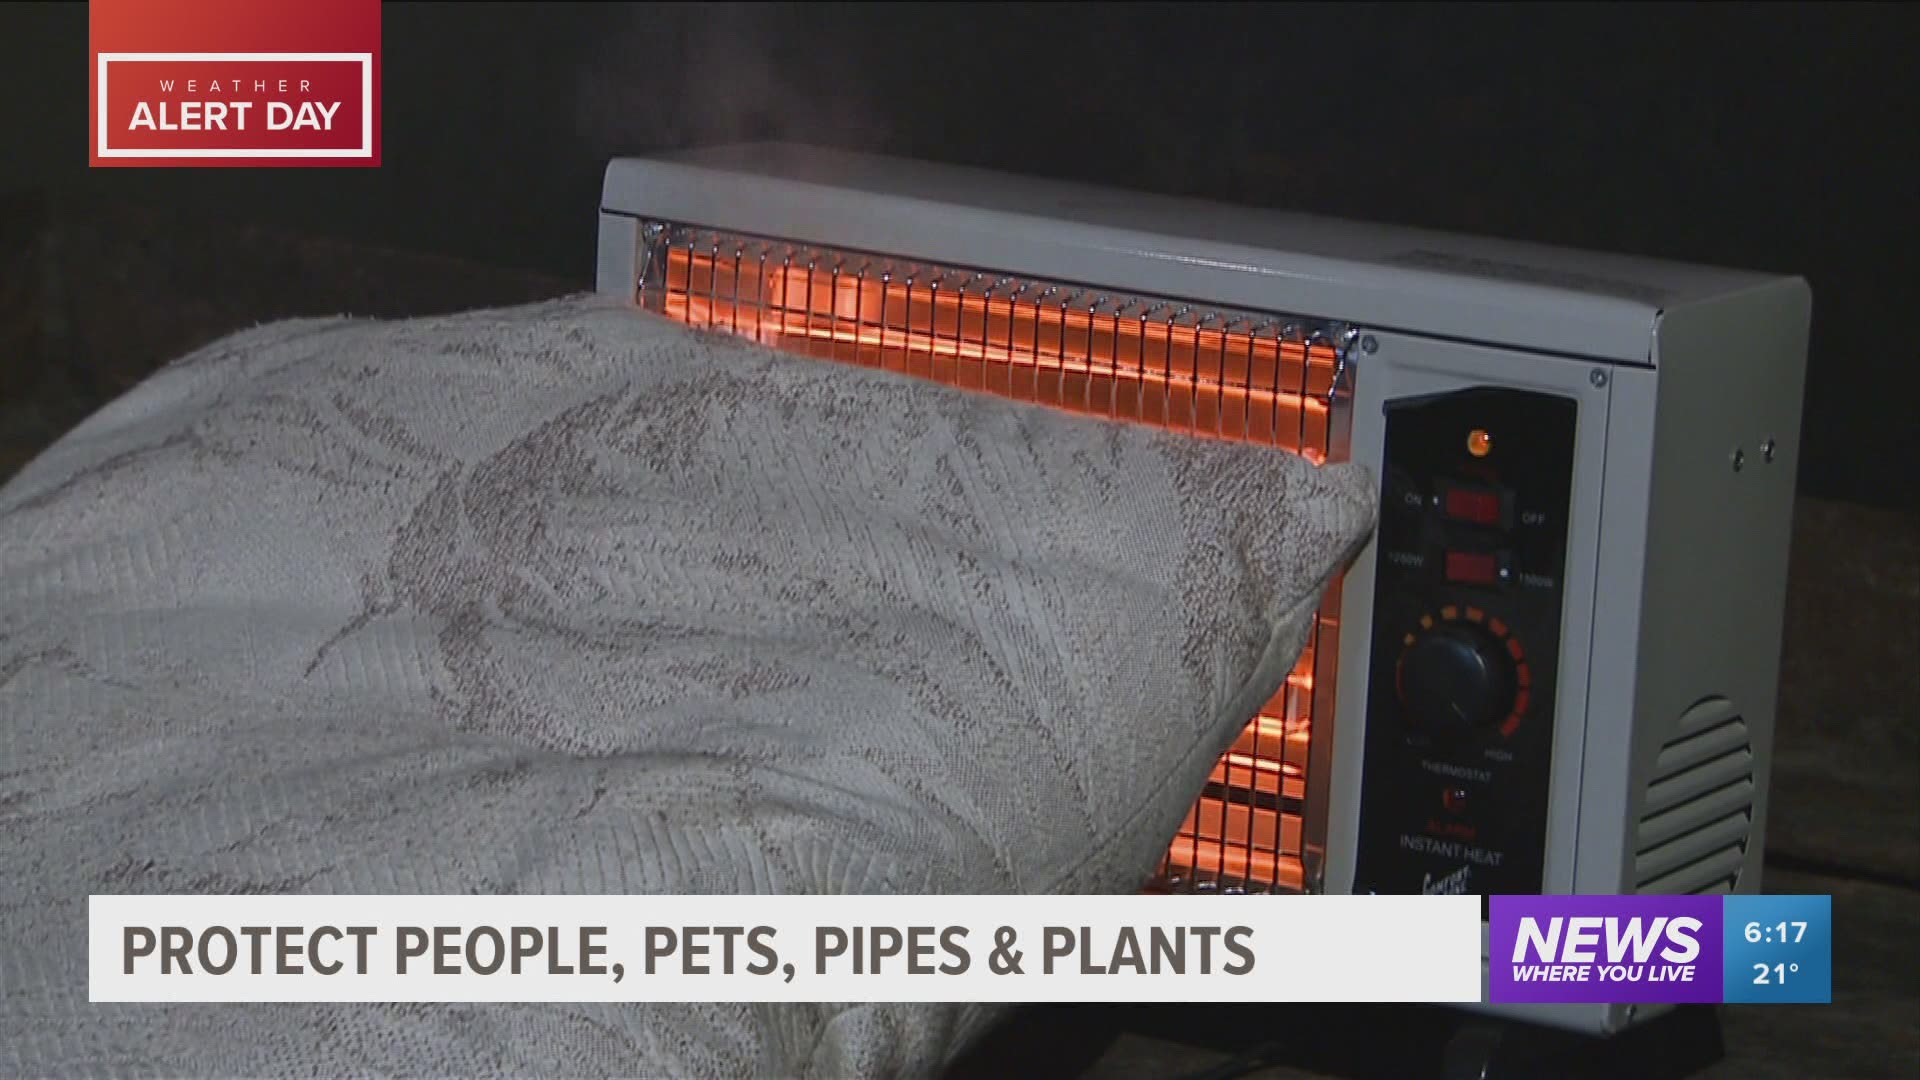 Experts provide guidance on keeping people, pets, pipes, and plants safe this winter.